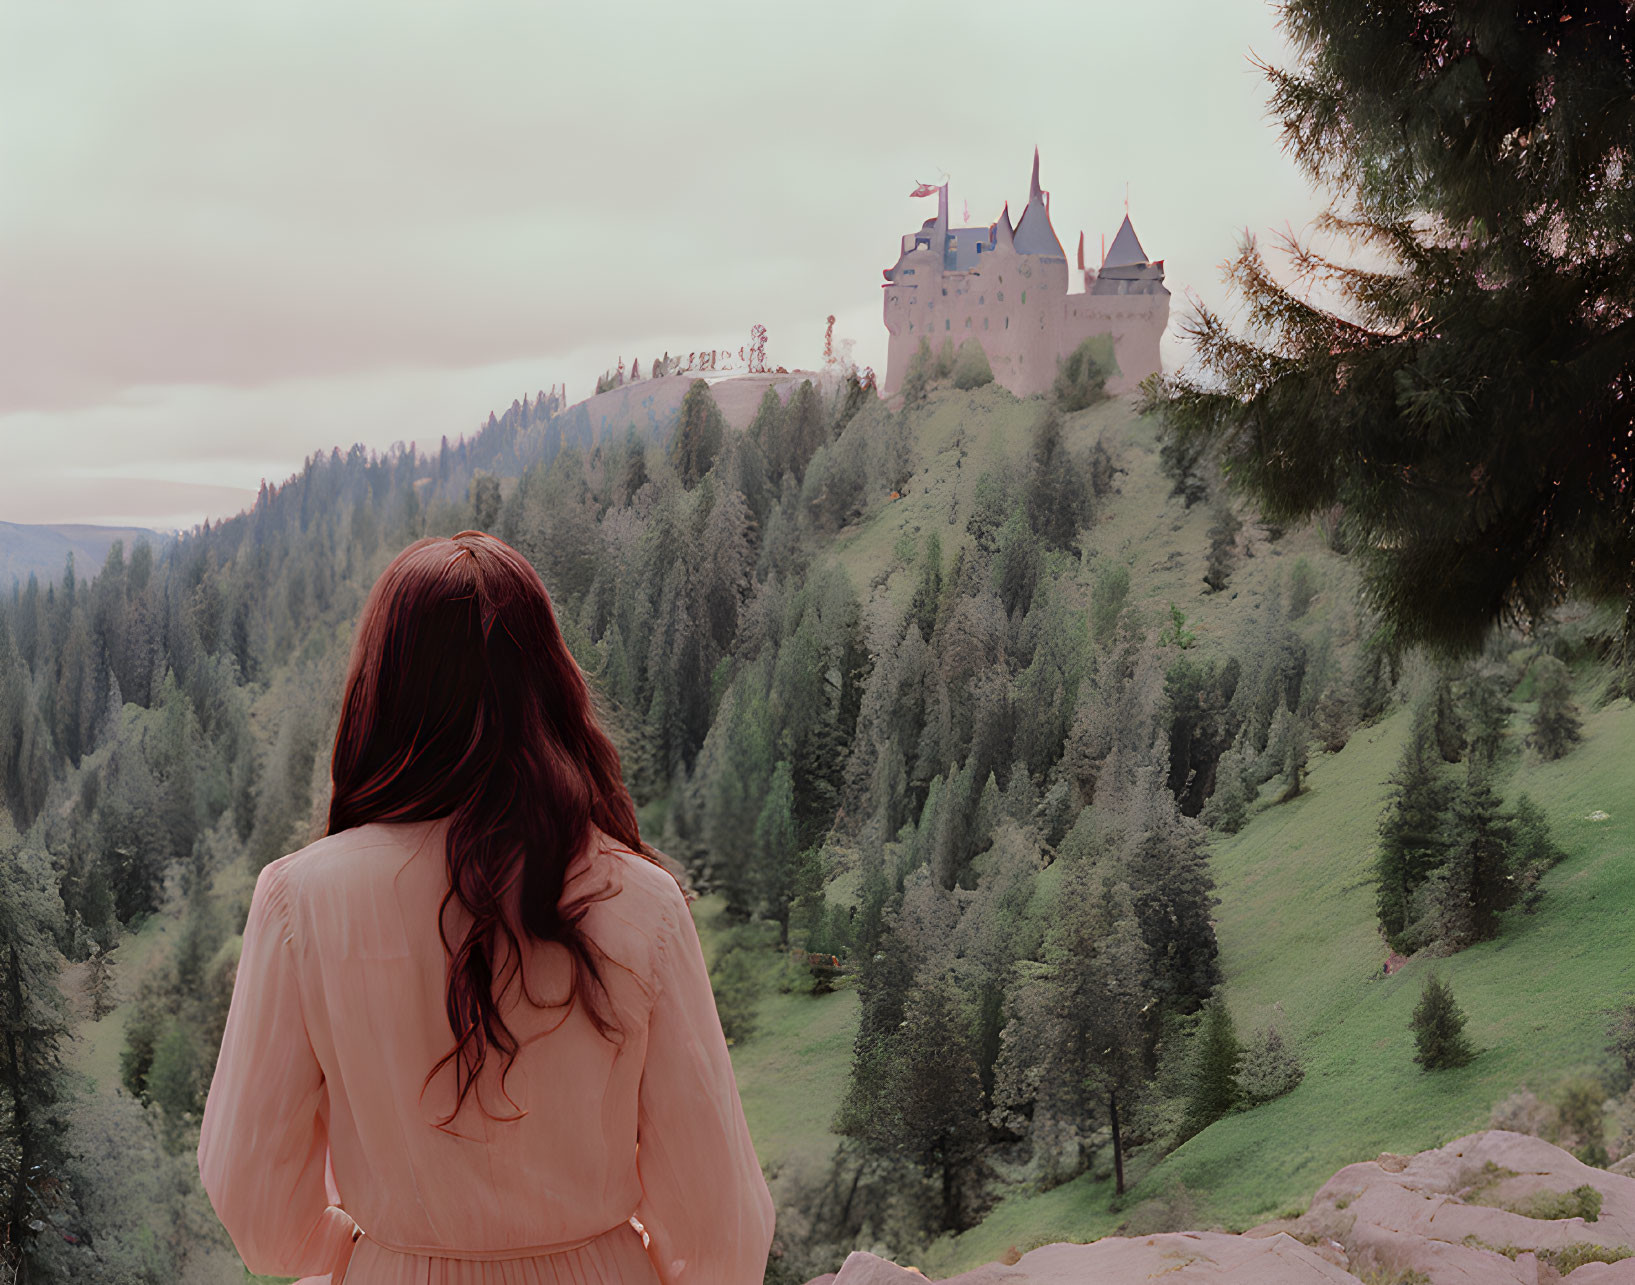 Woman in light blouse gazes at distant castle on lush hillside with coniferous trees under cloudy